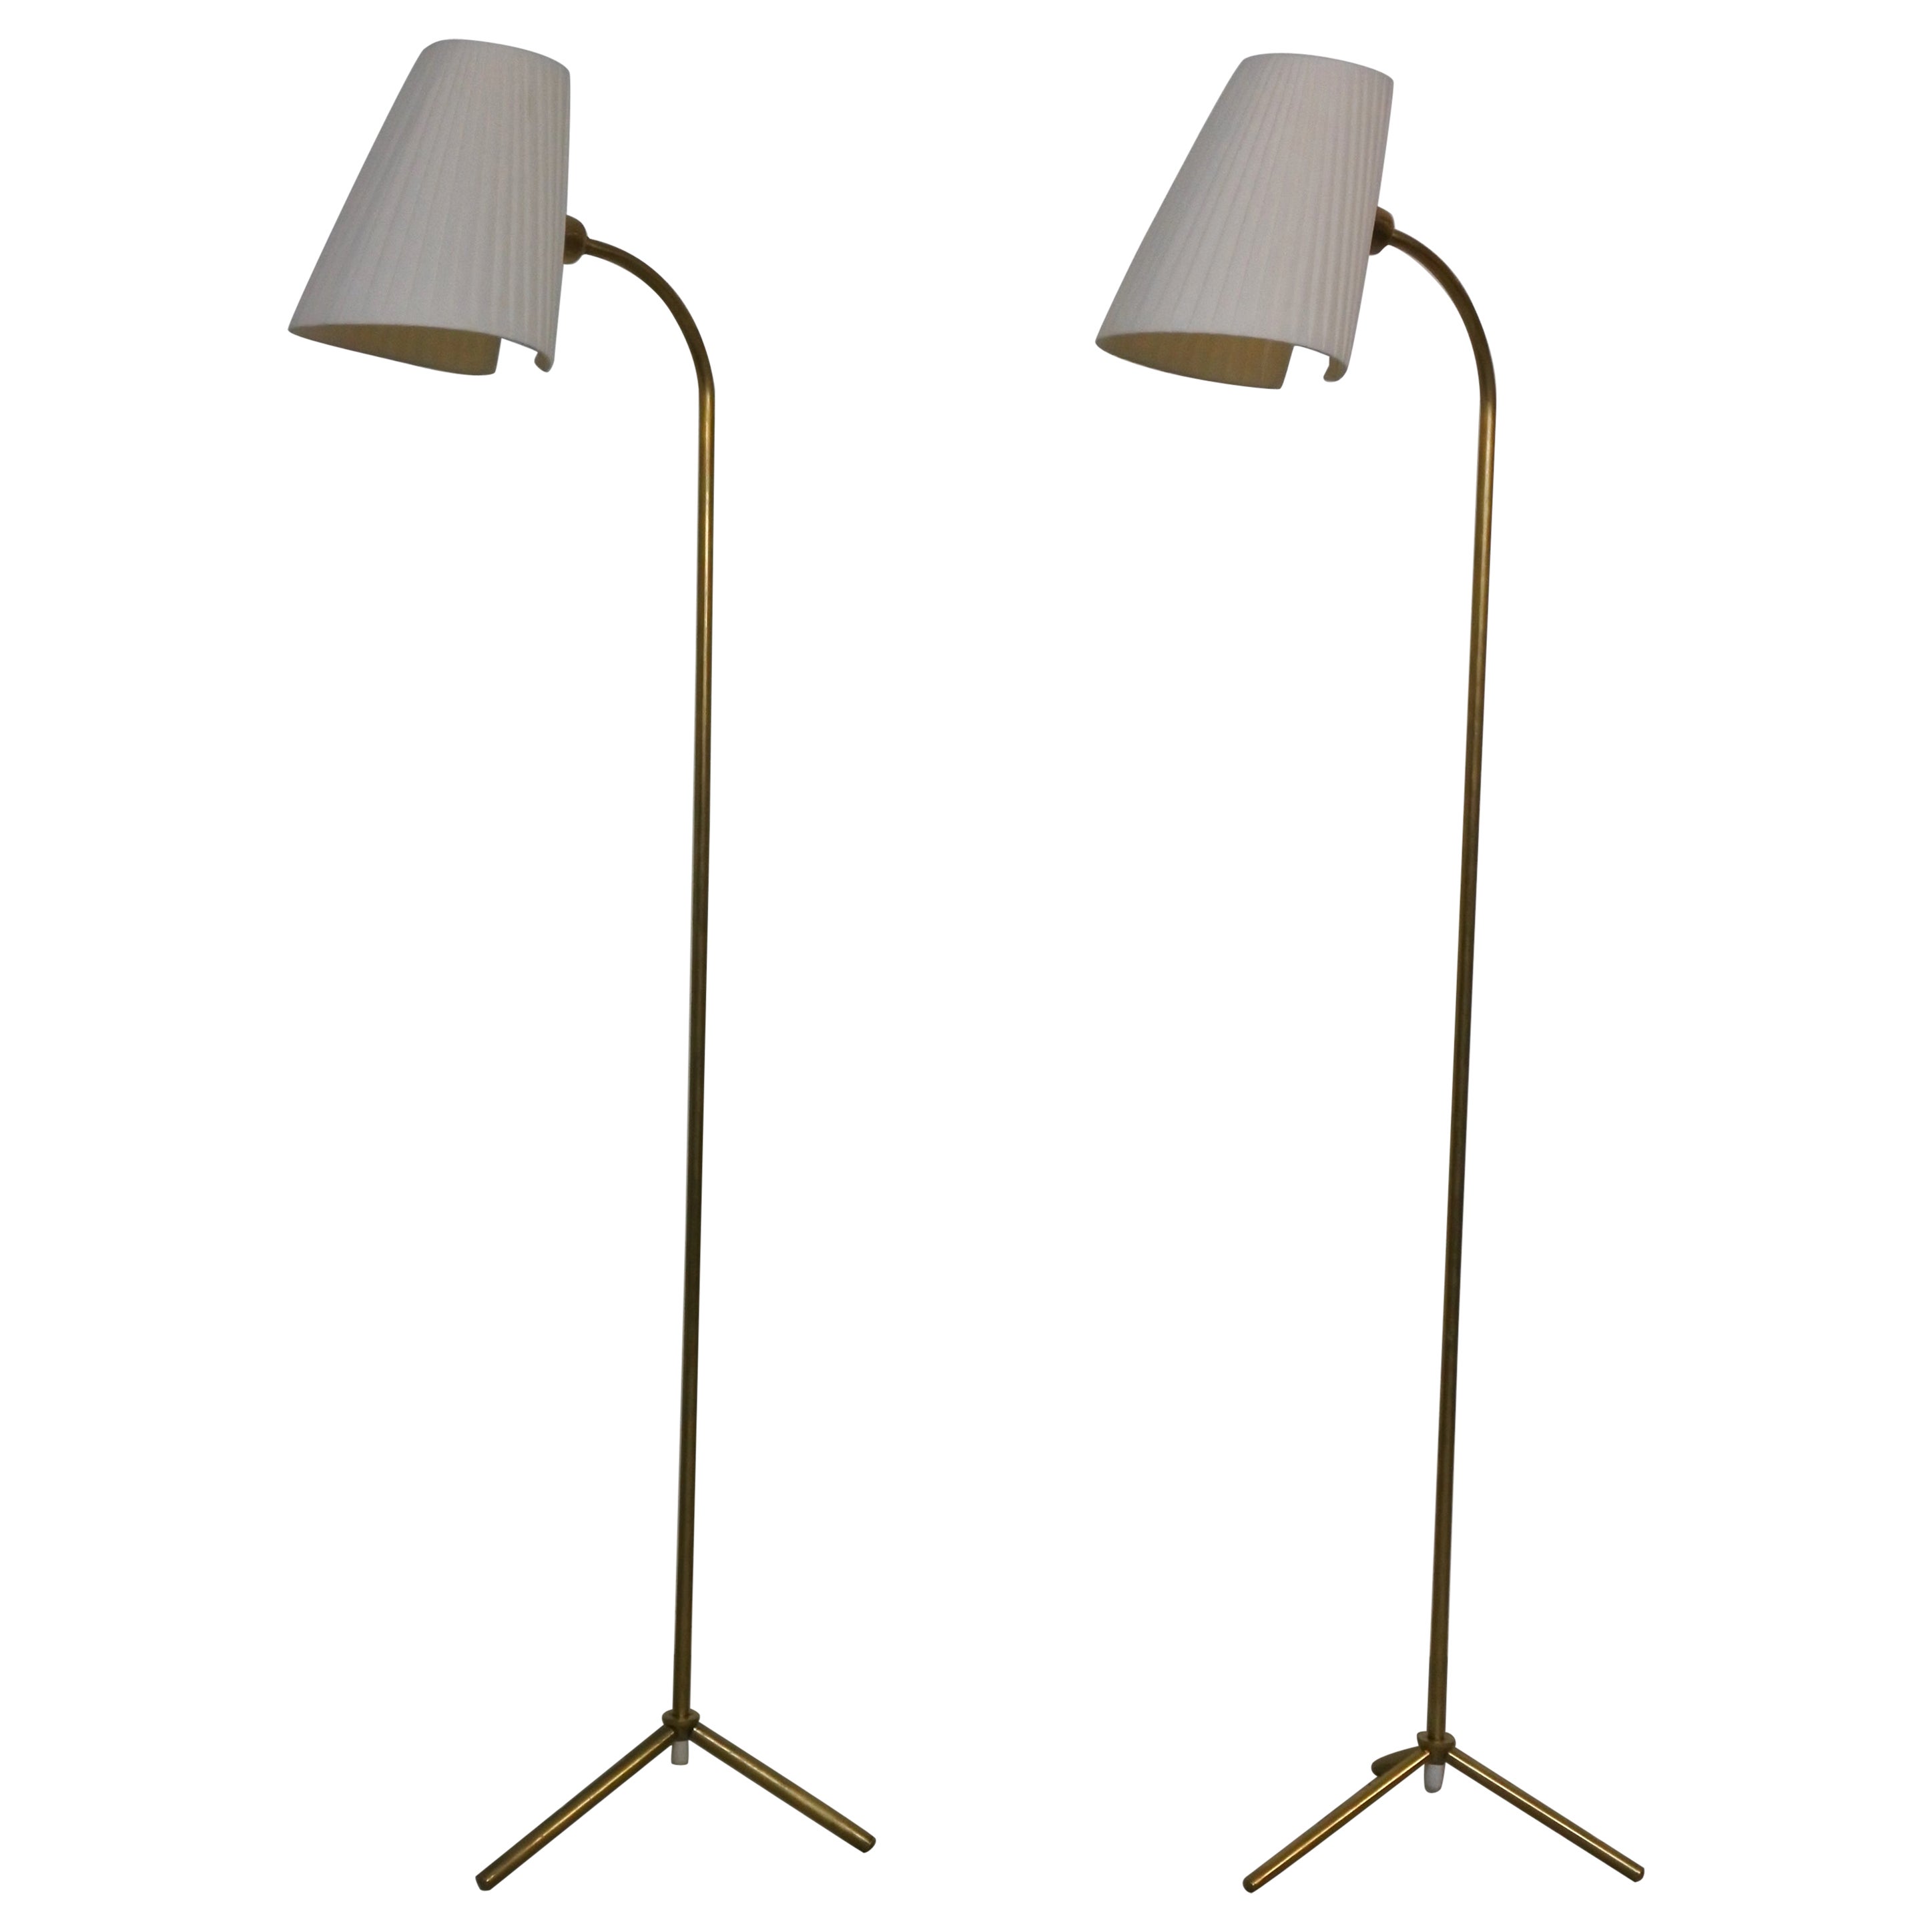 Tripod Floor Lamps in Brass by Lisa Johansson-Pape & Orno, Finland 1950s For Sale